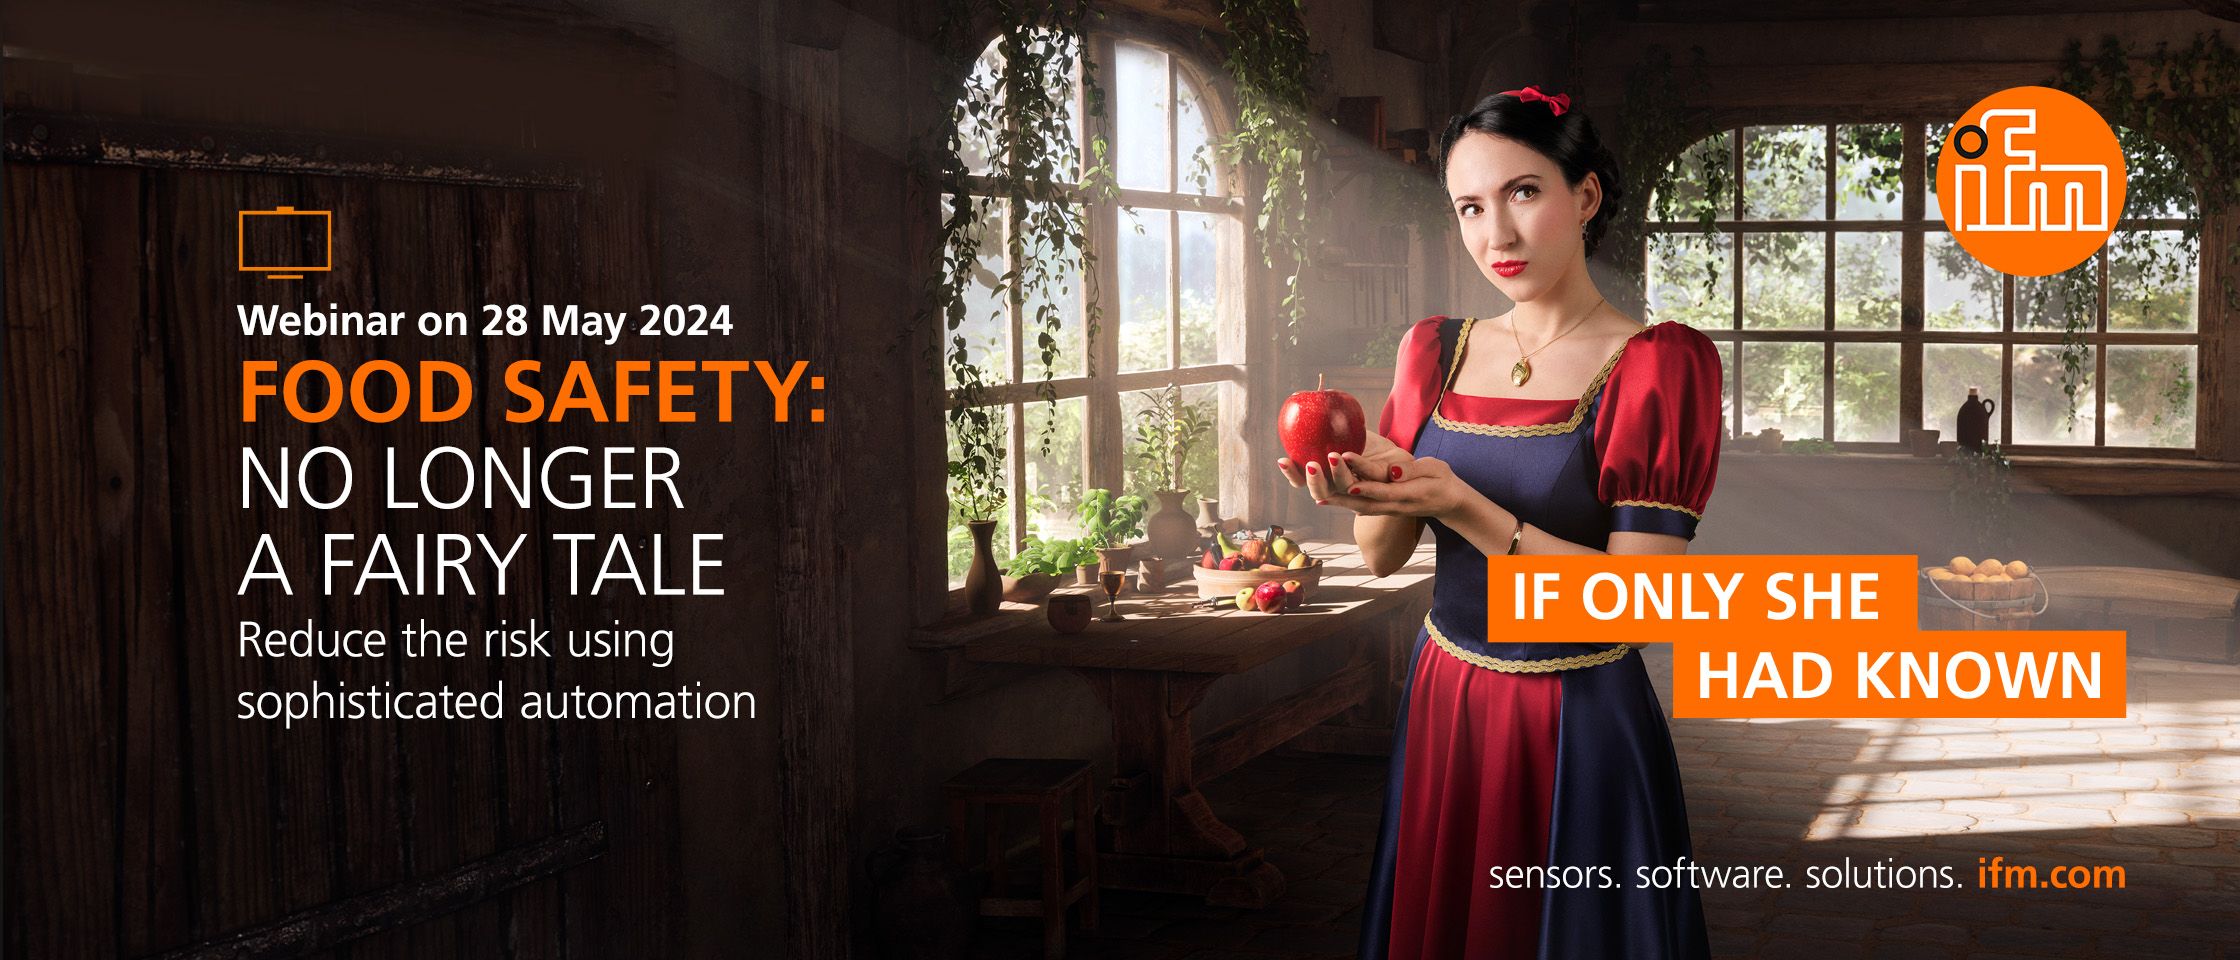 Food Safety: No longer a fairy tale